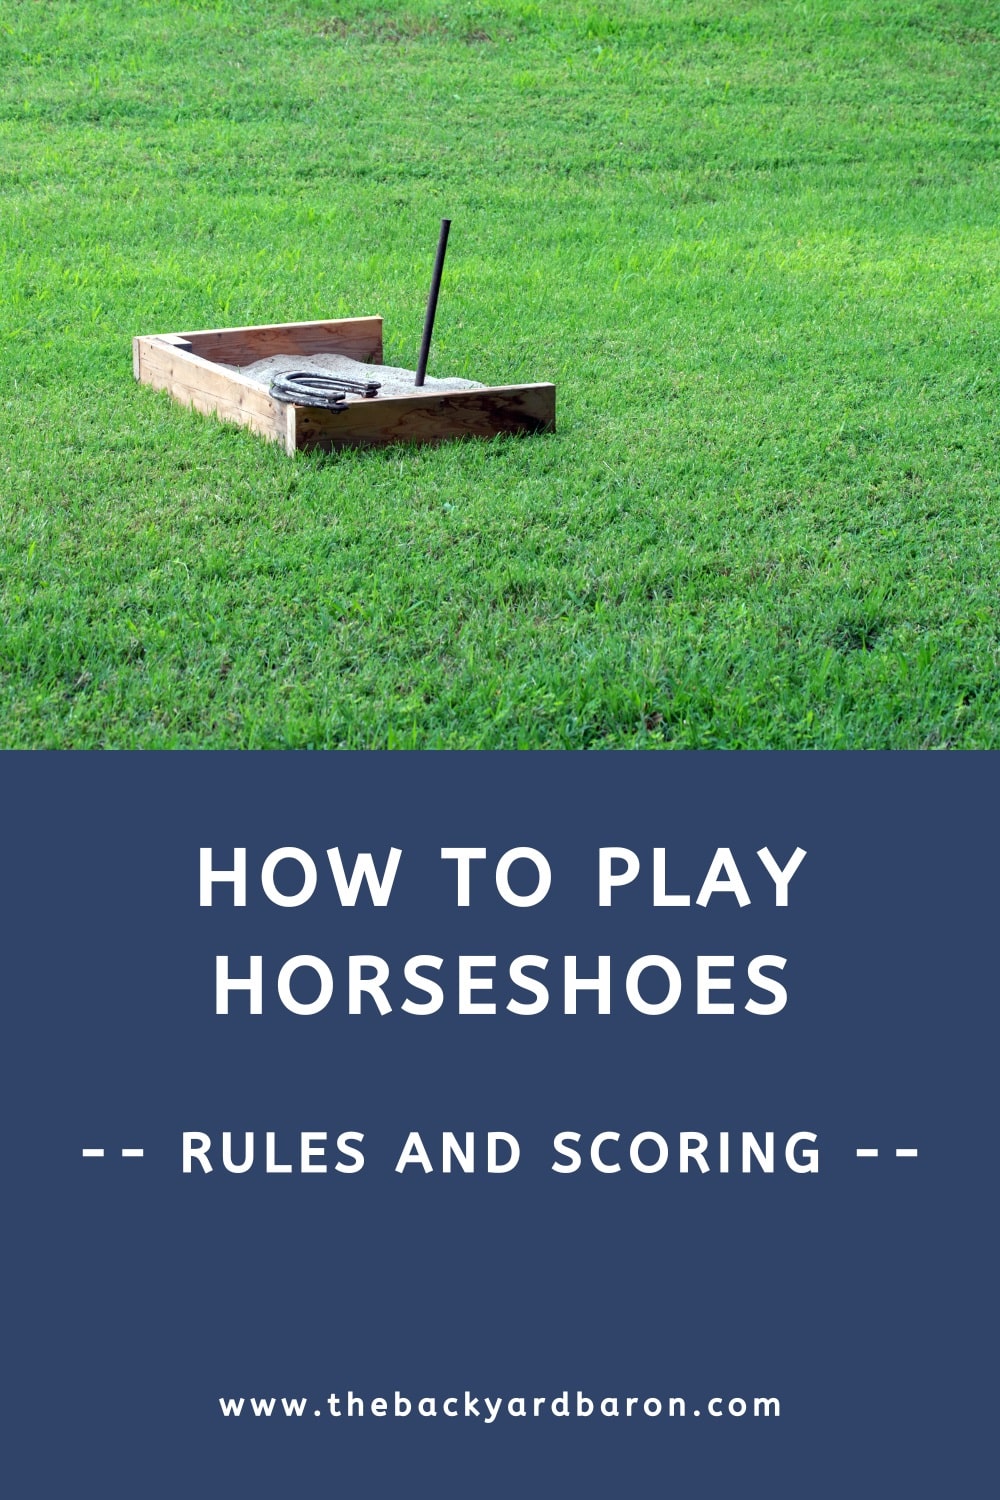 How to play horseshoe pitching